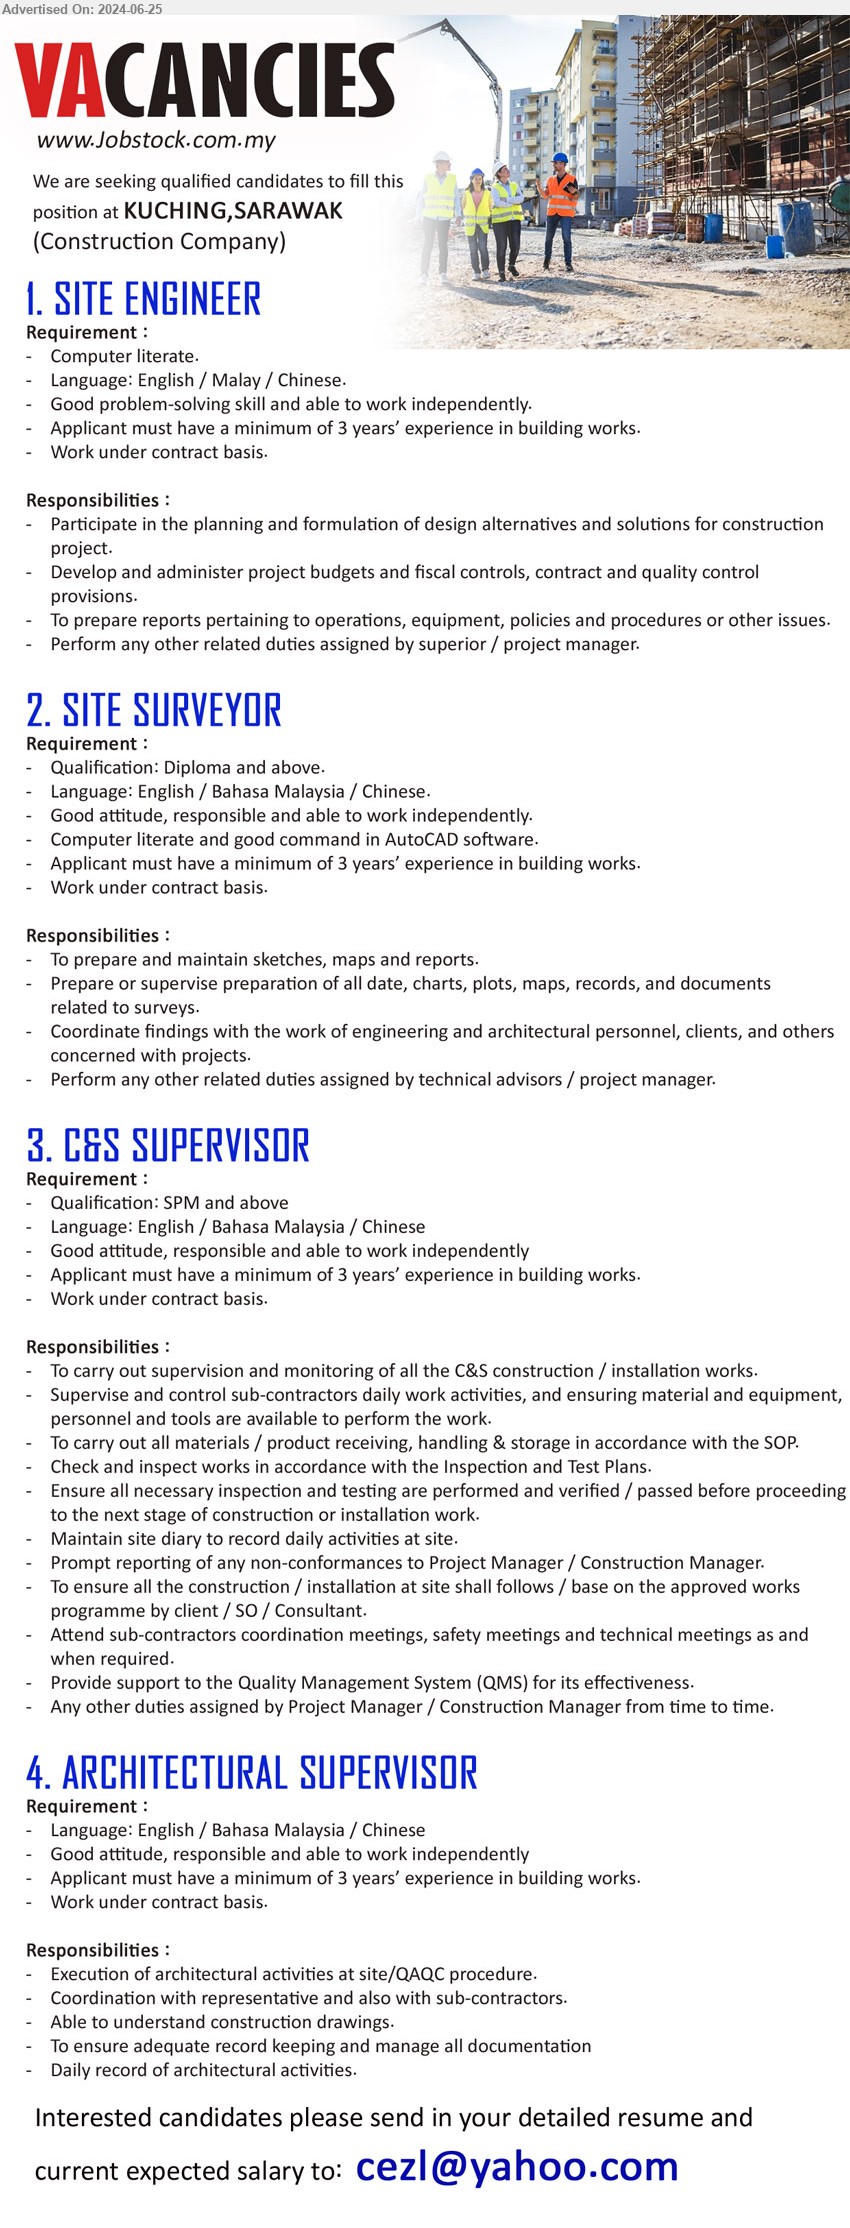 ADVERTISER (Construction Company) - 1. SITE ENGINEER (Kuching), 3 yrs. exp., Participate in the planning and formulation of design alternatives and solutions for construction project.,...
2. SITE SURVEYOR (Kuching), Diploma & above, applicant must have a minimum of 3 years’ experience in building works,...
3. C&S SUPERVISOR (Kuching), SPM & above, 3 yrs. exp., To carry out supervision and monitoring of all the C&S construction / installation works.,...
4. ARCHITECTURAL SUPERVISOR (Kuching), 3 yrs. exp., Execution of architectural activities at site/QAQC procedure.,...
Email resume to ...